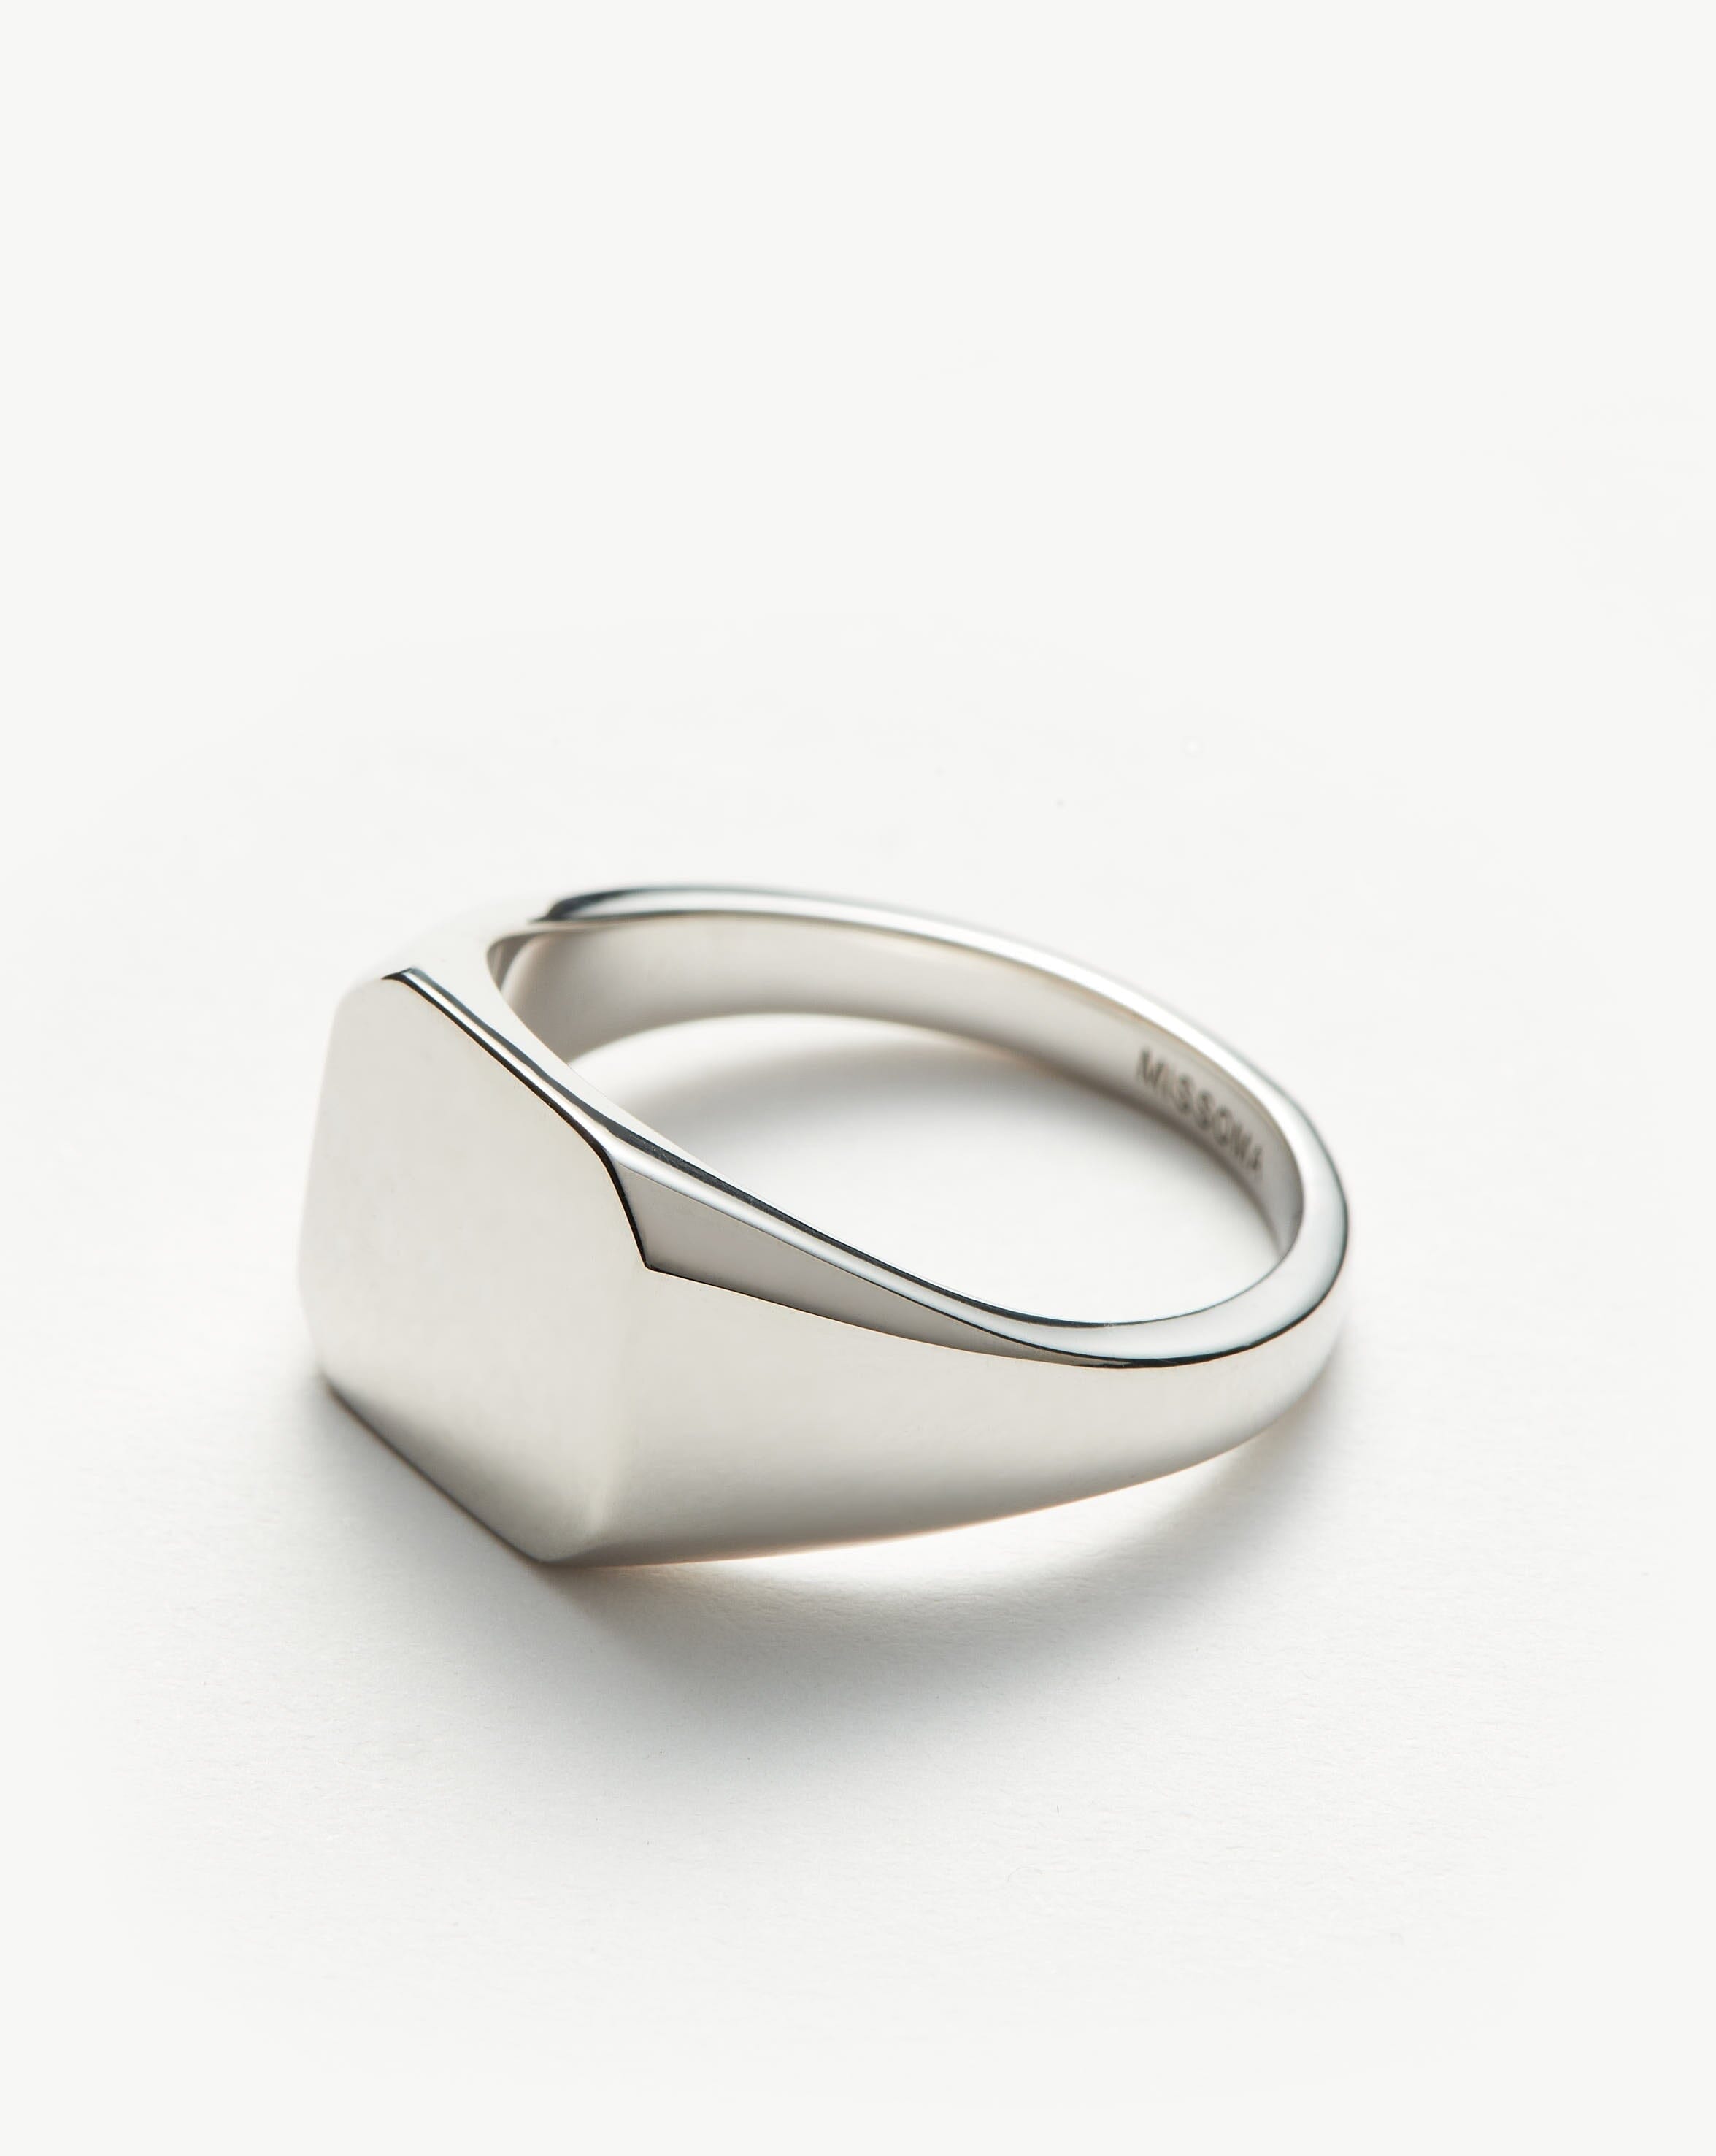 Yale Sterling Silver Oval Signet Ring - Graduation Gift Selection |  M.LaHart & Co.